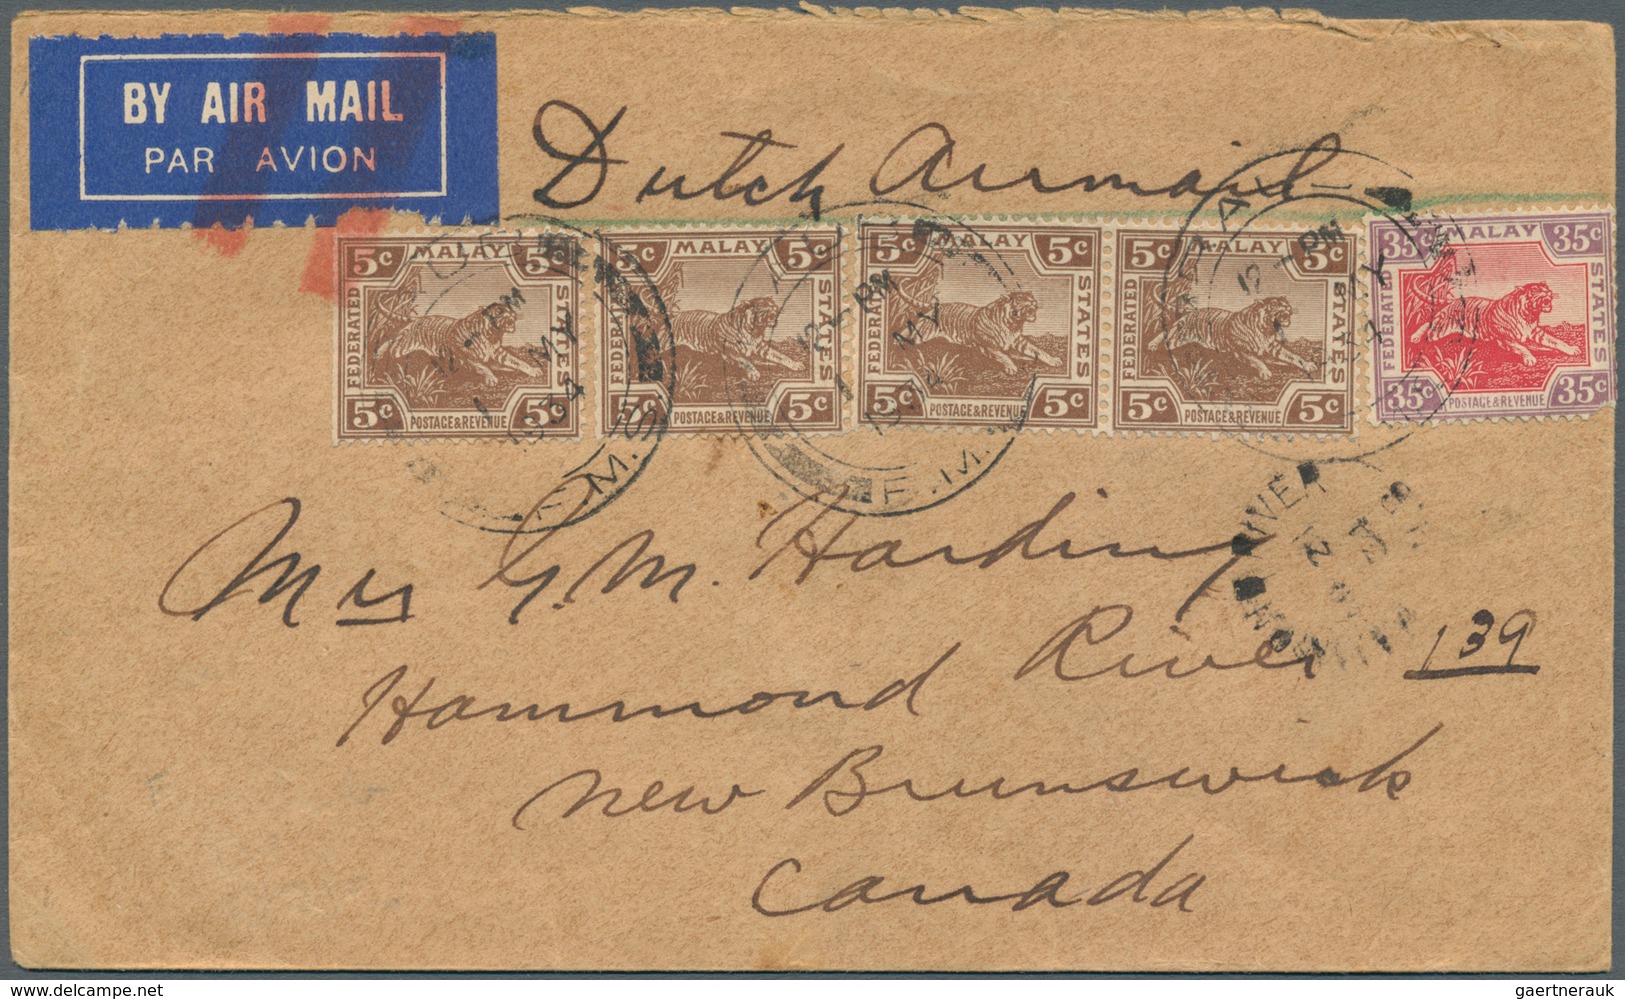 06256 Malaiische Staaten - Pahang: 1934 Airmail Cover From Raub To Hammond River, New Brunswick, Canada By - Pahang